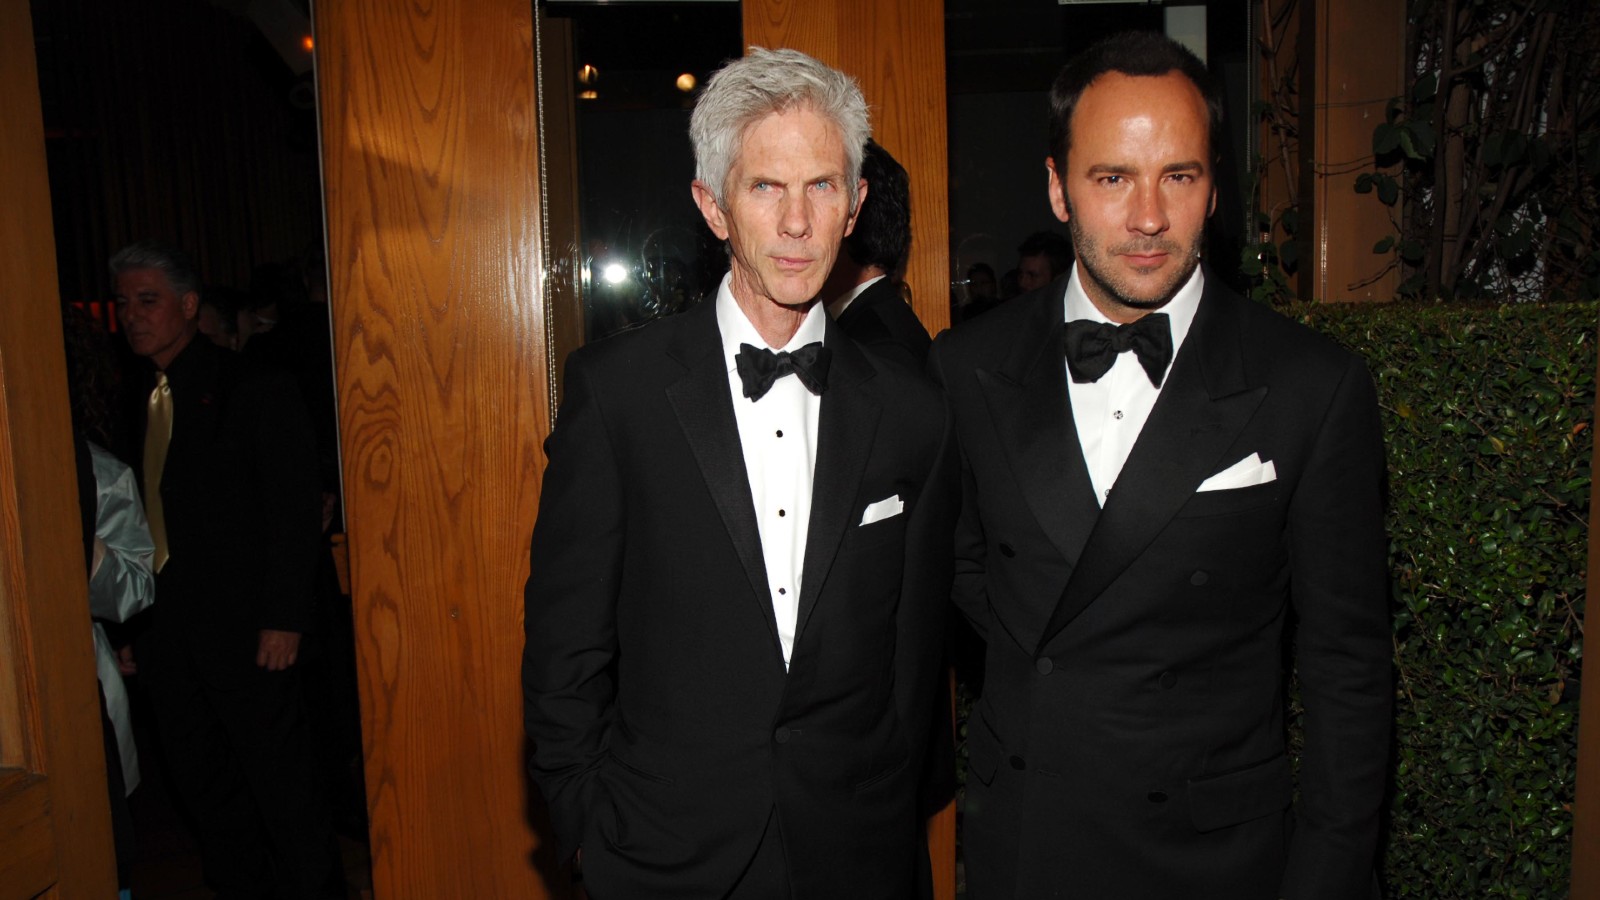 who is tom ford married to, Tom Ford Married to Longtime Richard Buckley –  The Hollywood Reporter 